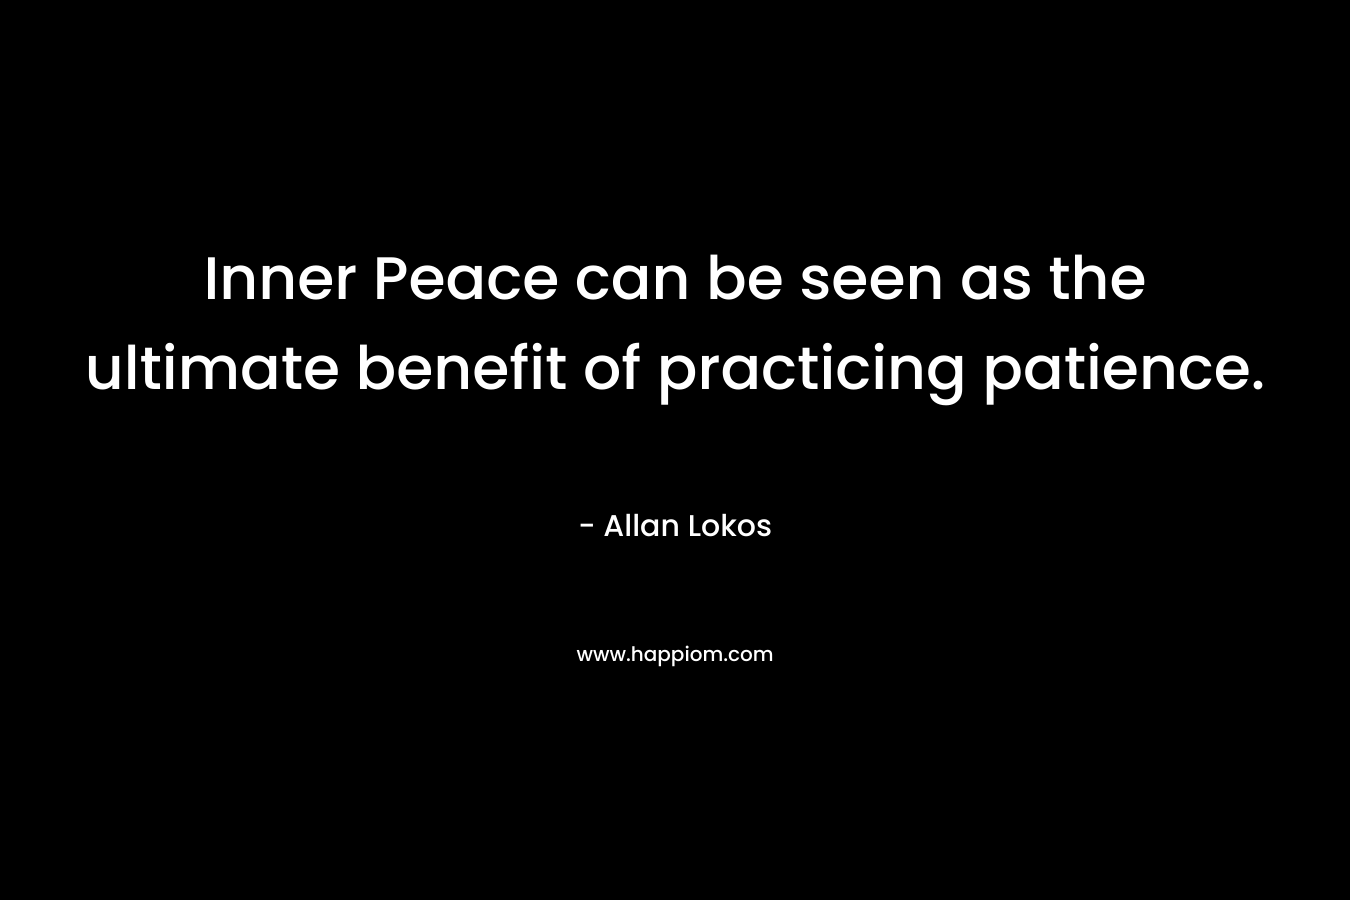 Inner Peace can be seen as the ultimate benefit of practicing patience. – Allan Lokos